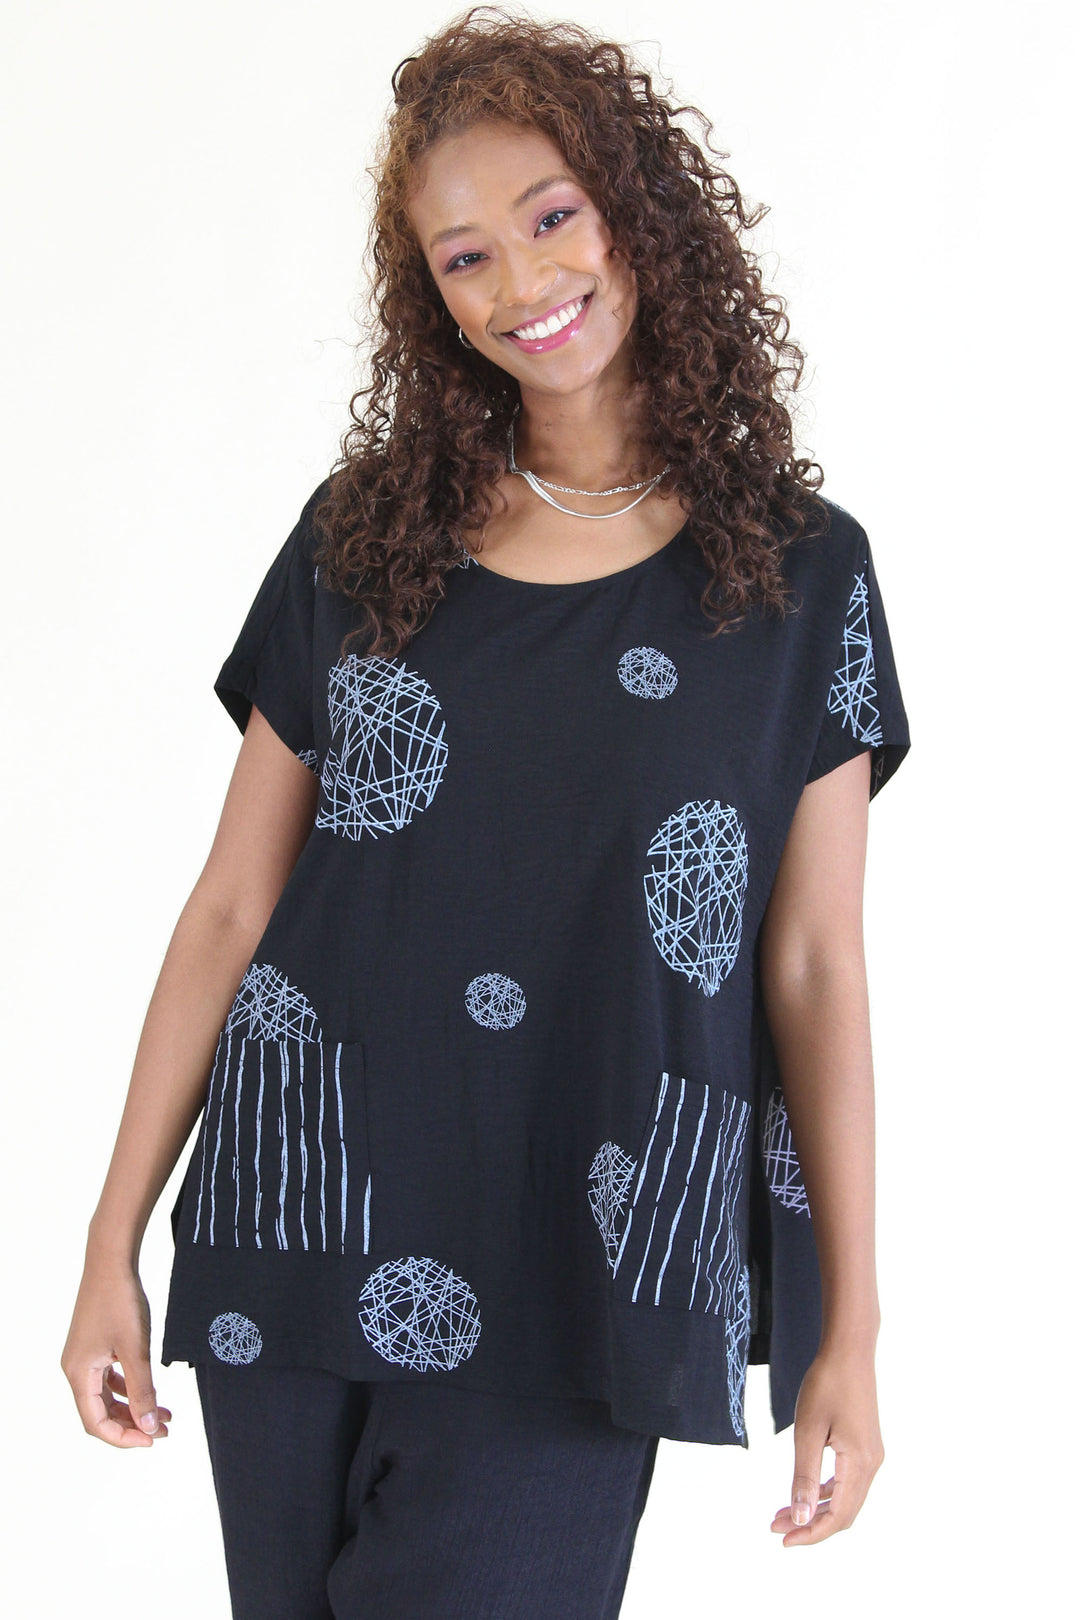 Fashion Concepts Summer 2024  This versatile top features two large front patch pockets, short dolman sleeves and a neat circles design pattern.